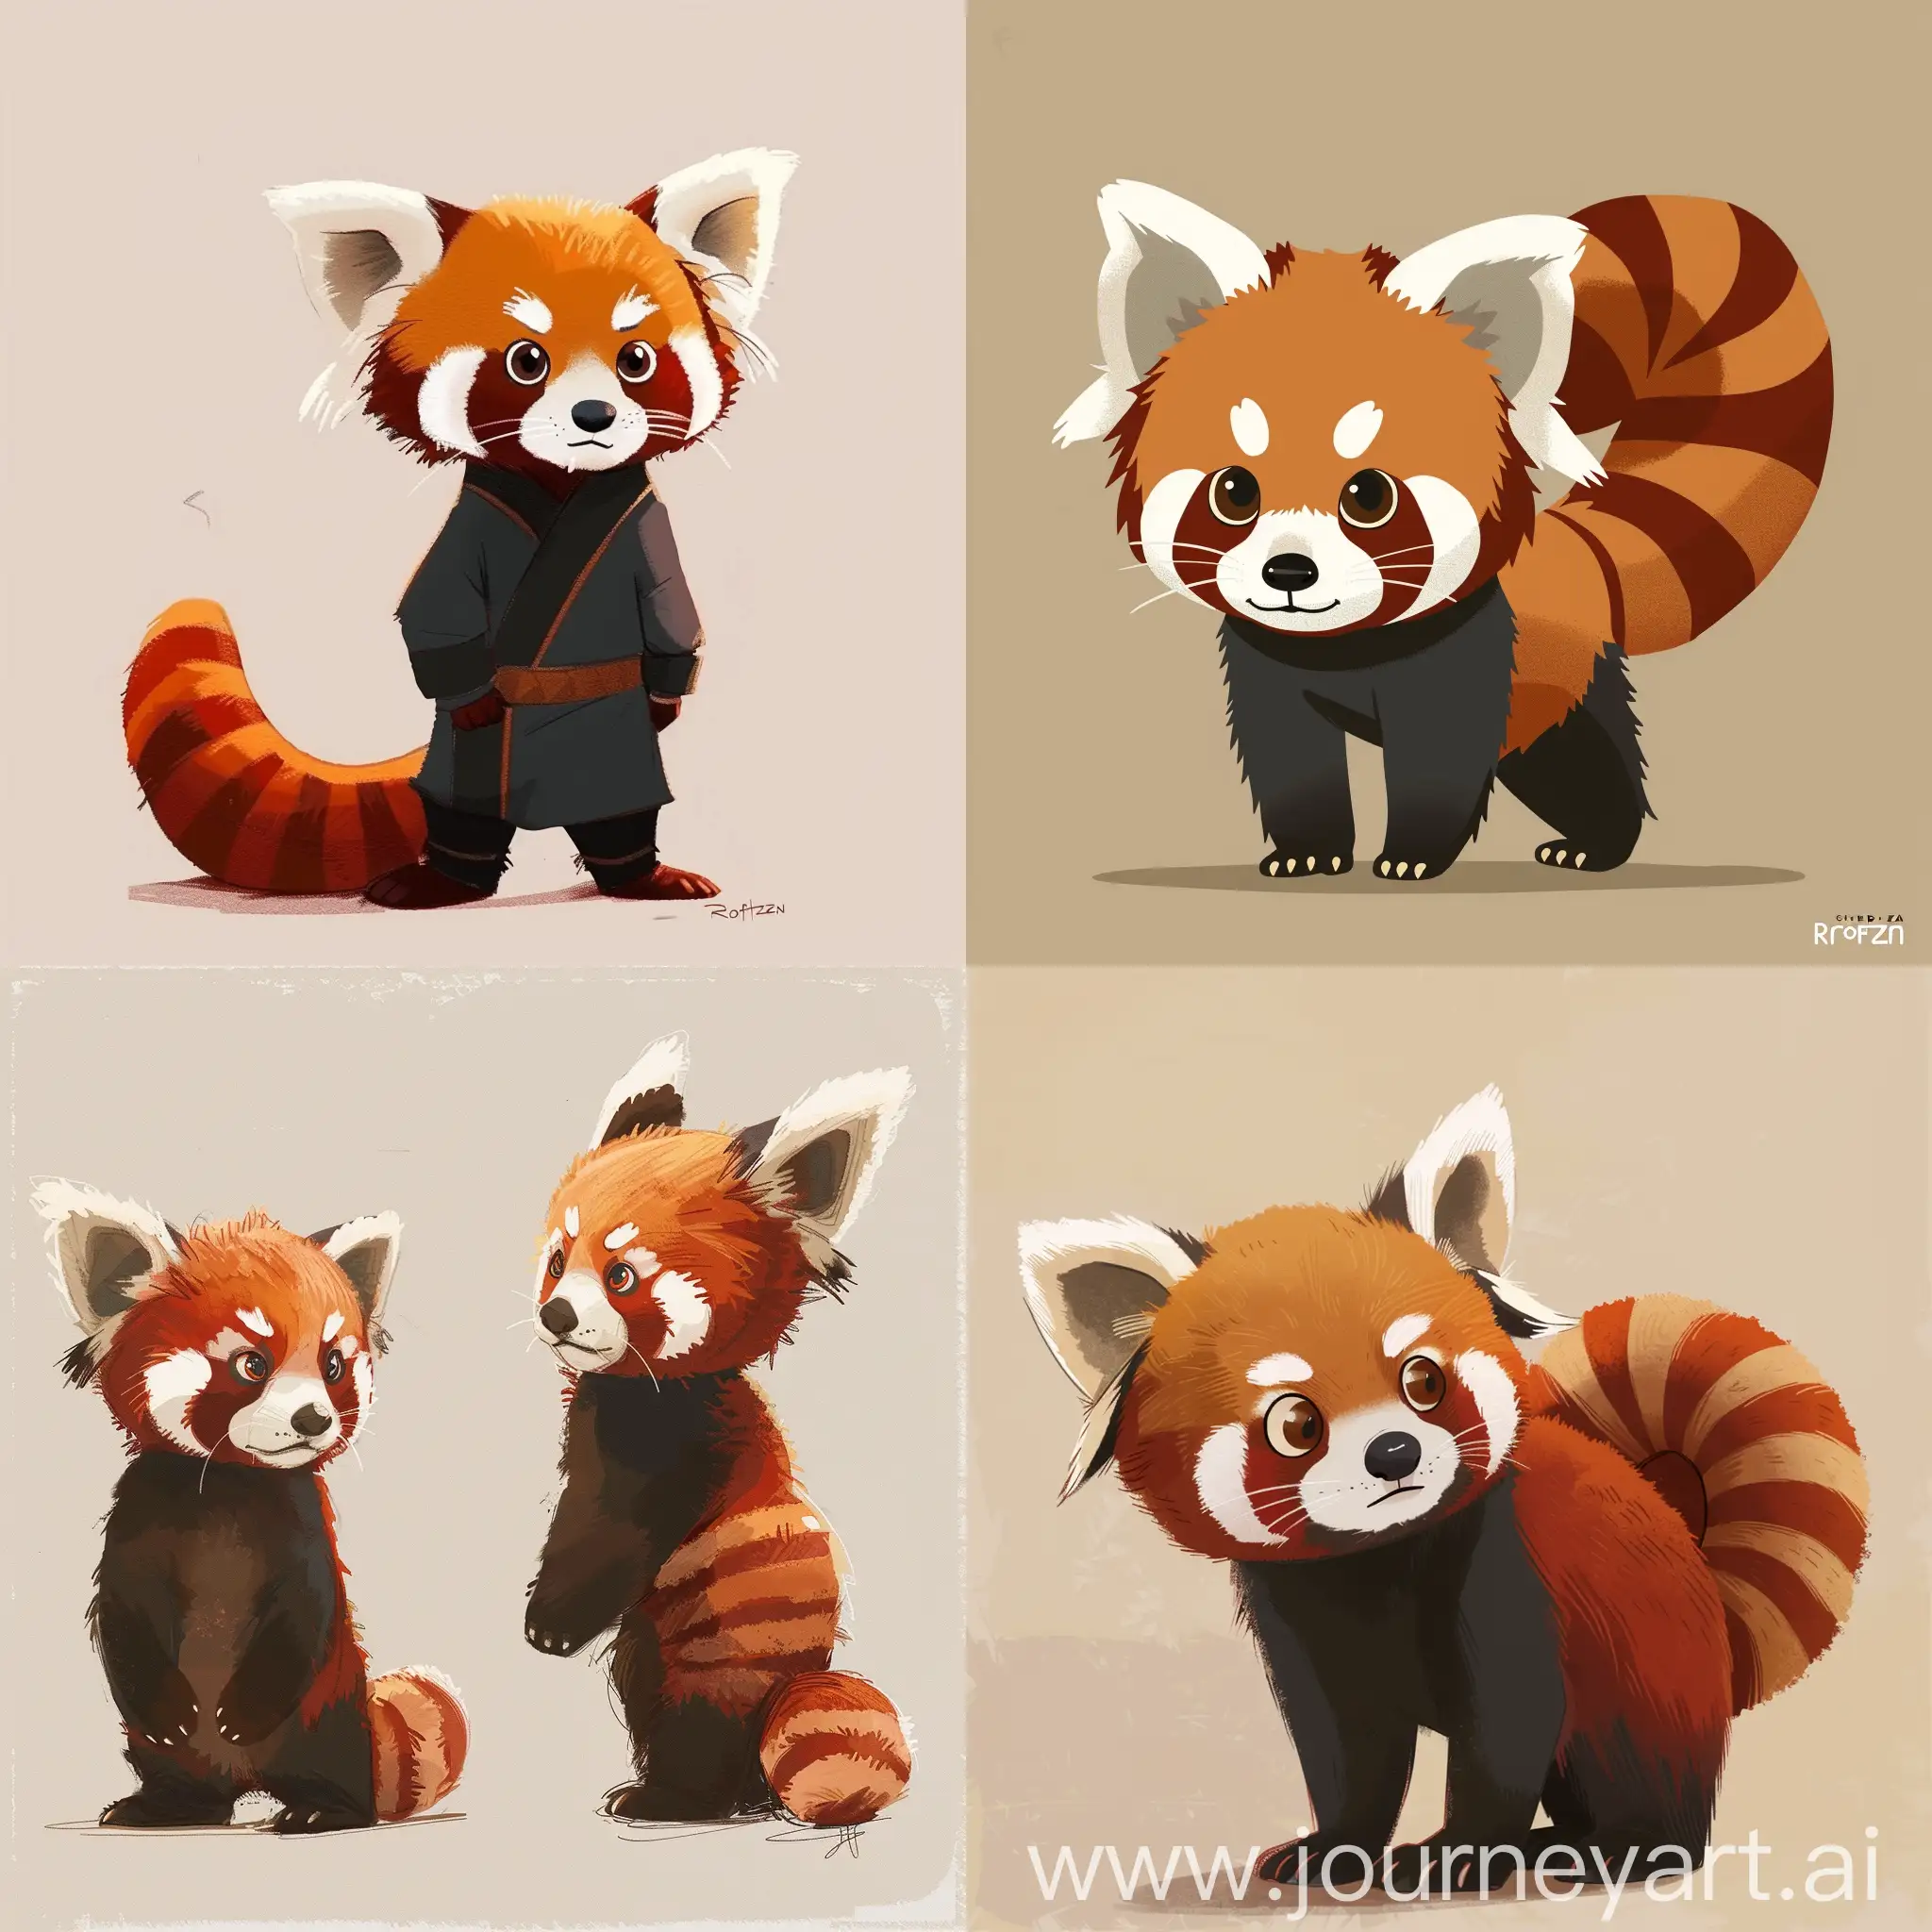 Adorable-Red-Panda-Series-Inspired-by-Studio-Ghibli-Minimalistic-Character-Designs-with-Exquisite-Details